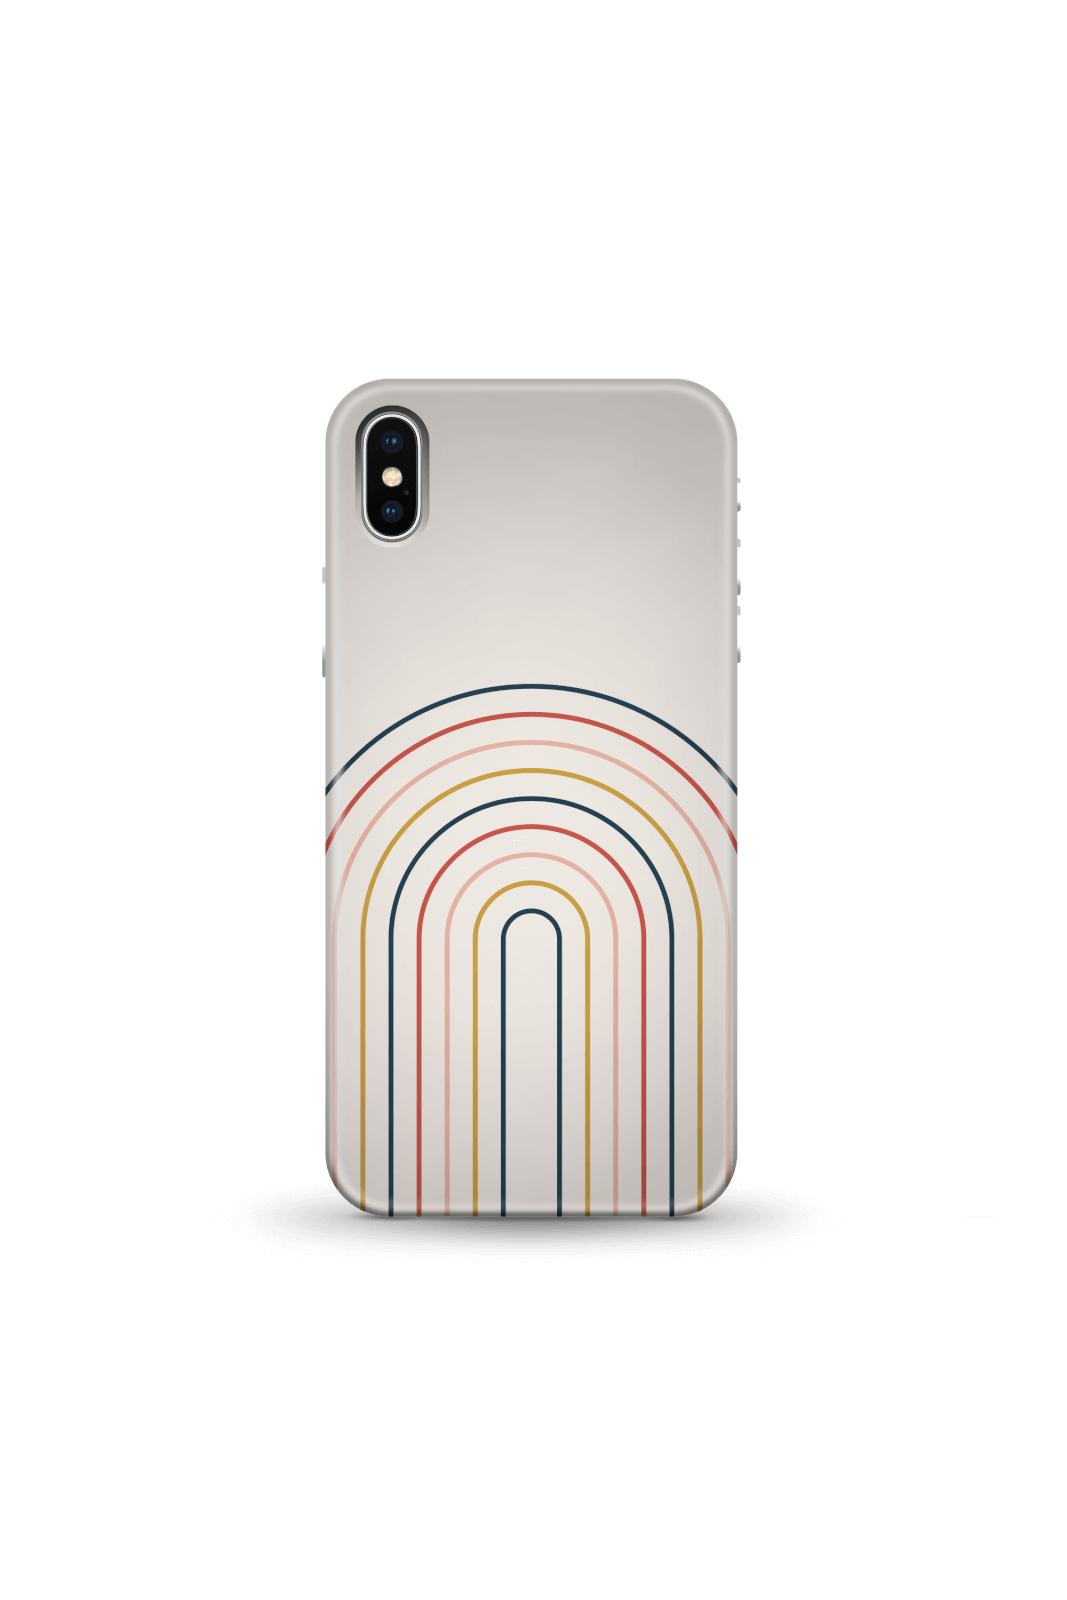 Striped Oval Phone Case for iPhone and Android - iPhone 5/5s - Snap Case - Matte